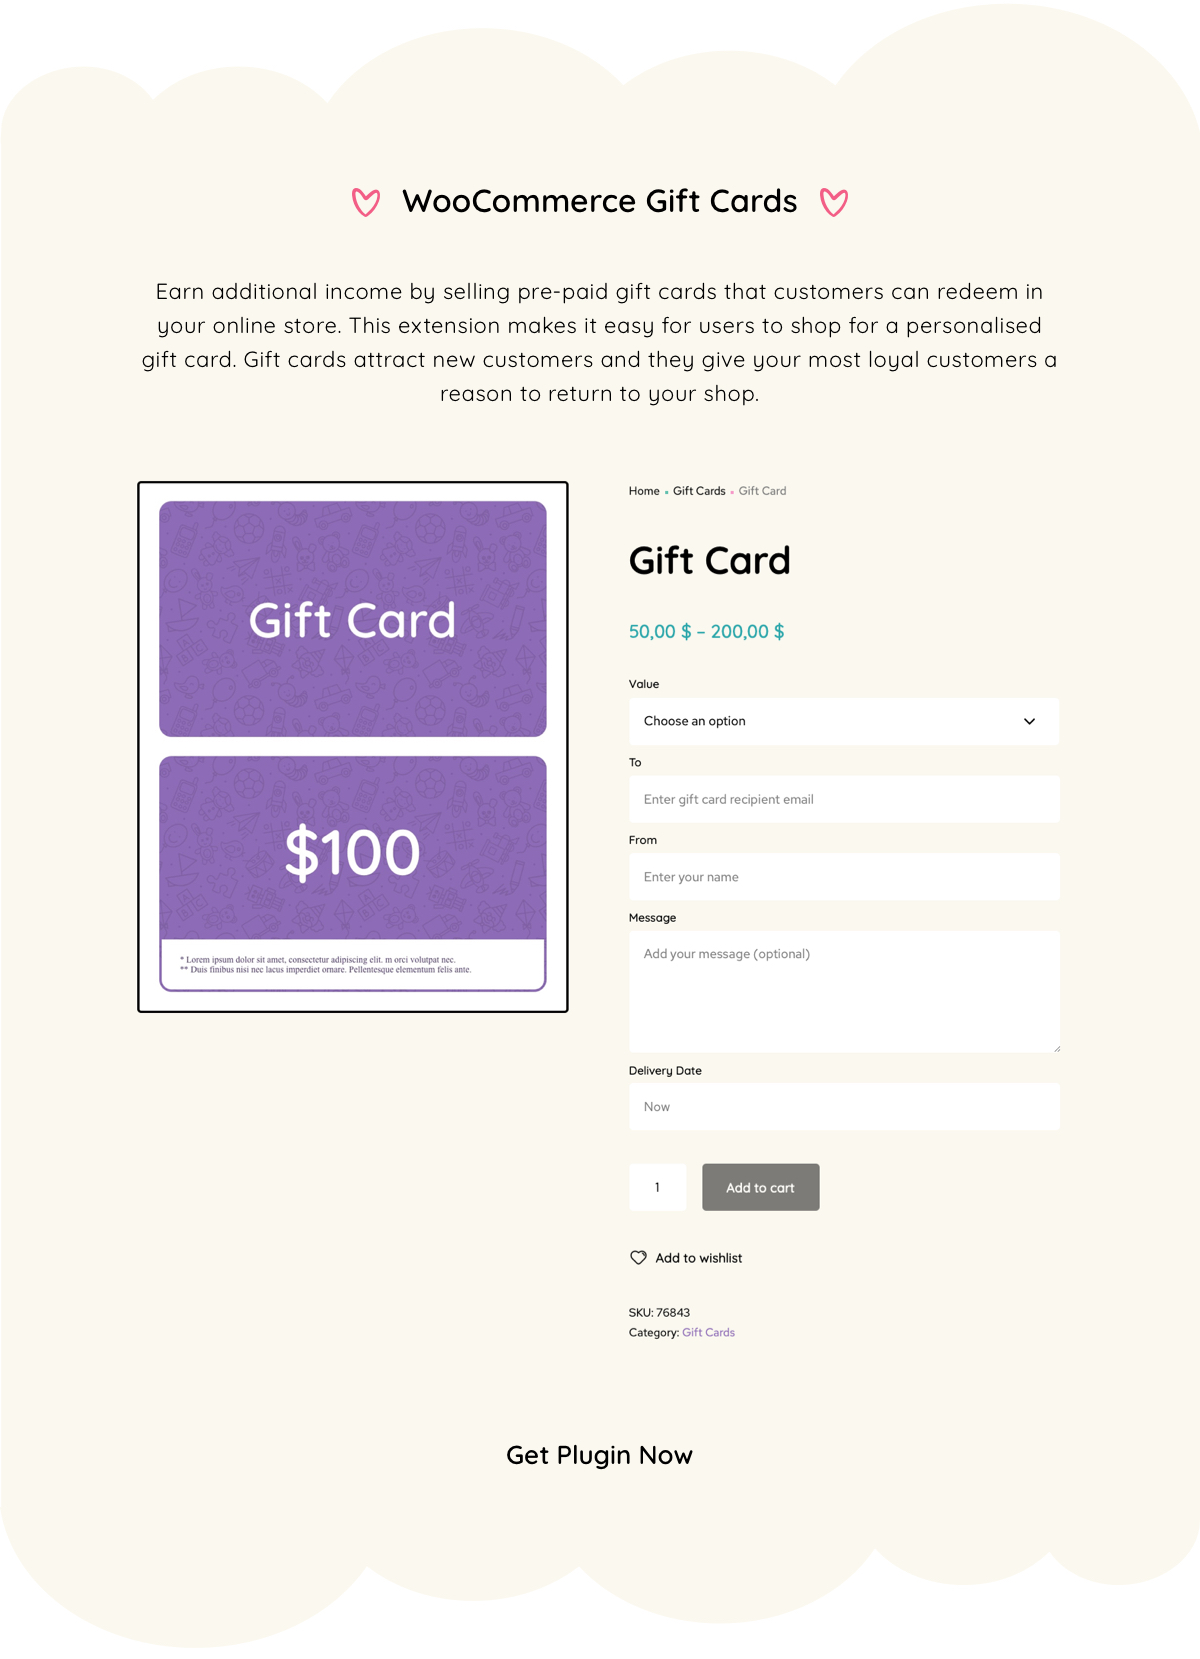 Treehouse - WooCommerce Gift Cards